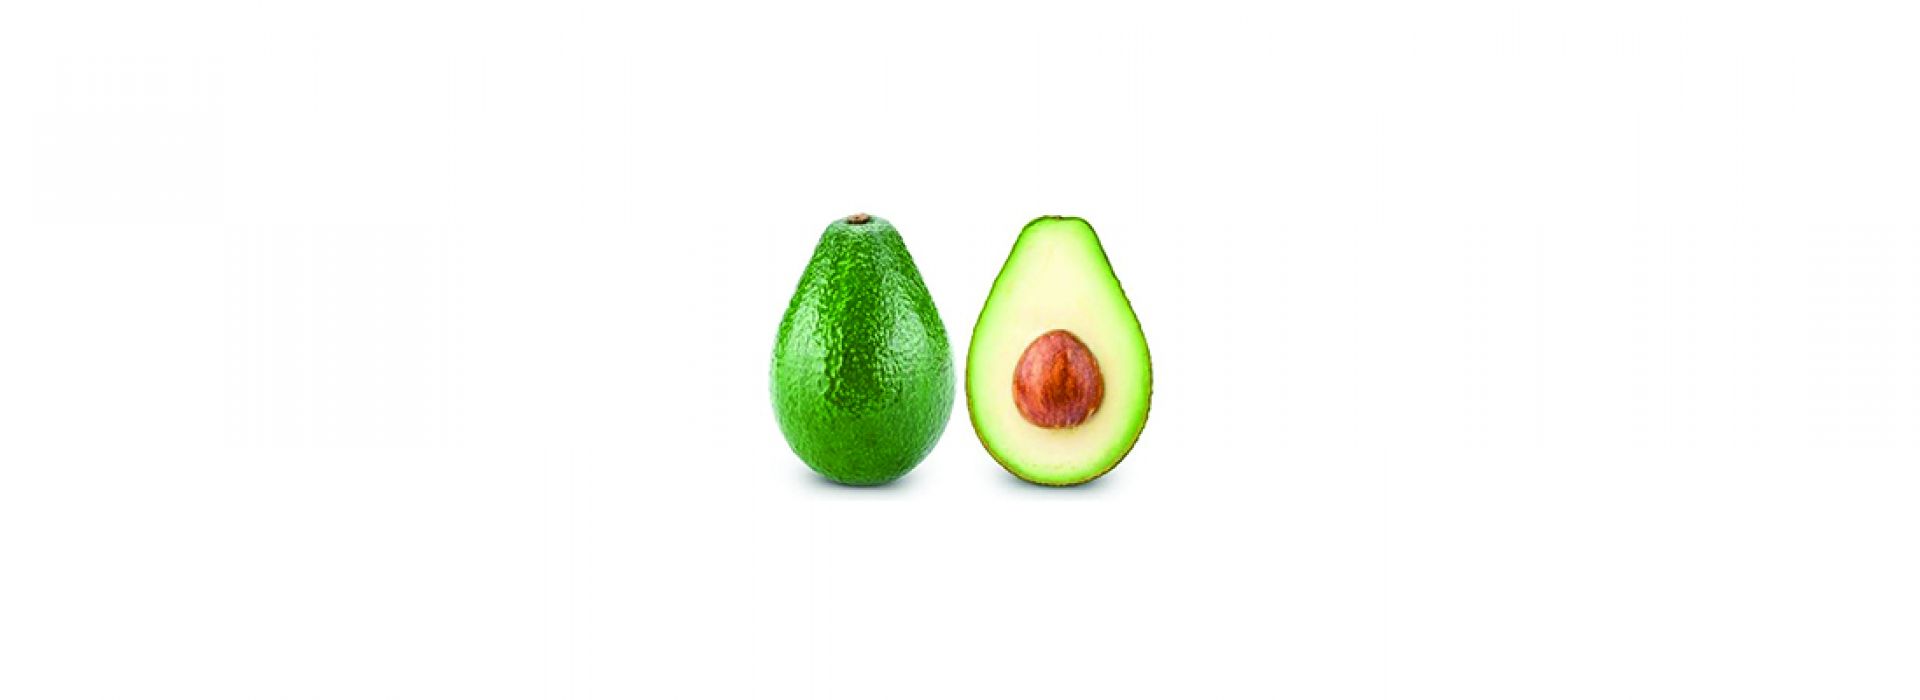 Imported Avocados